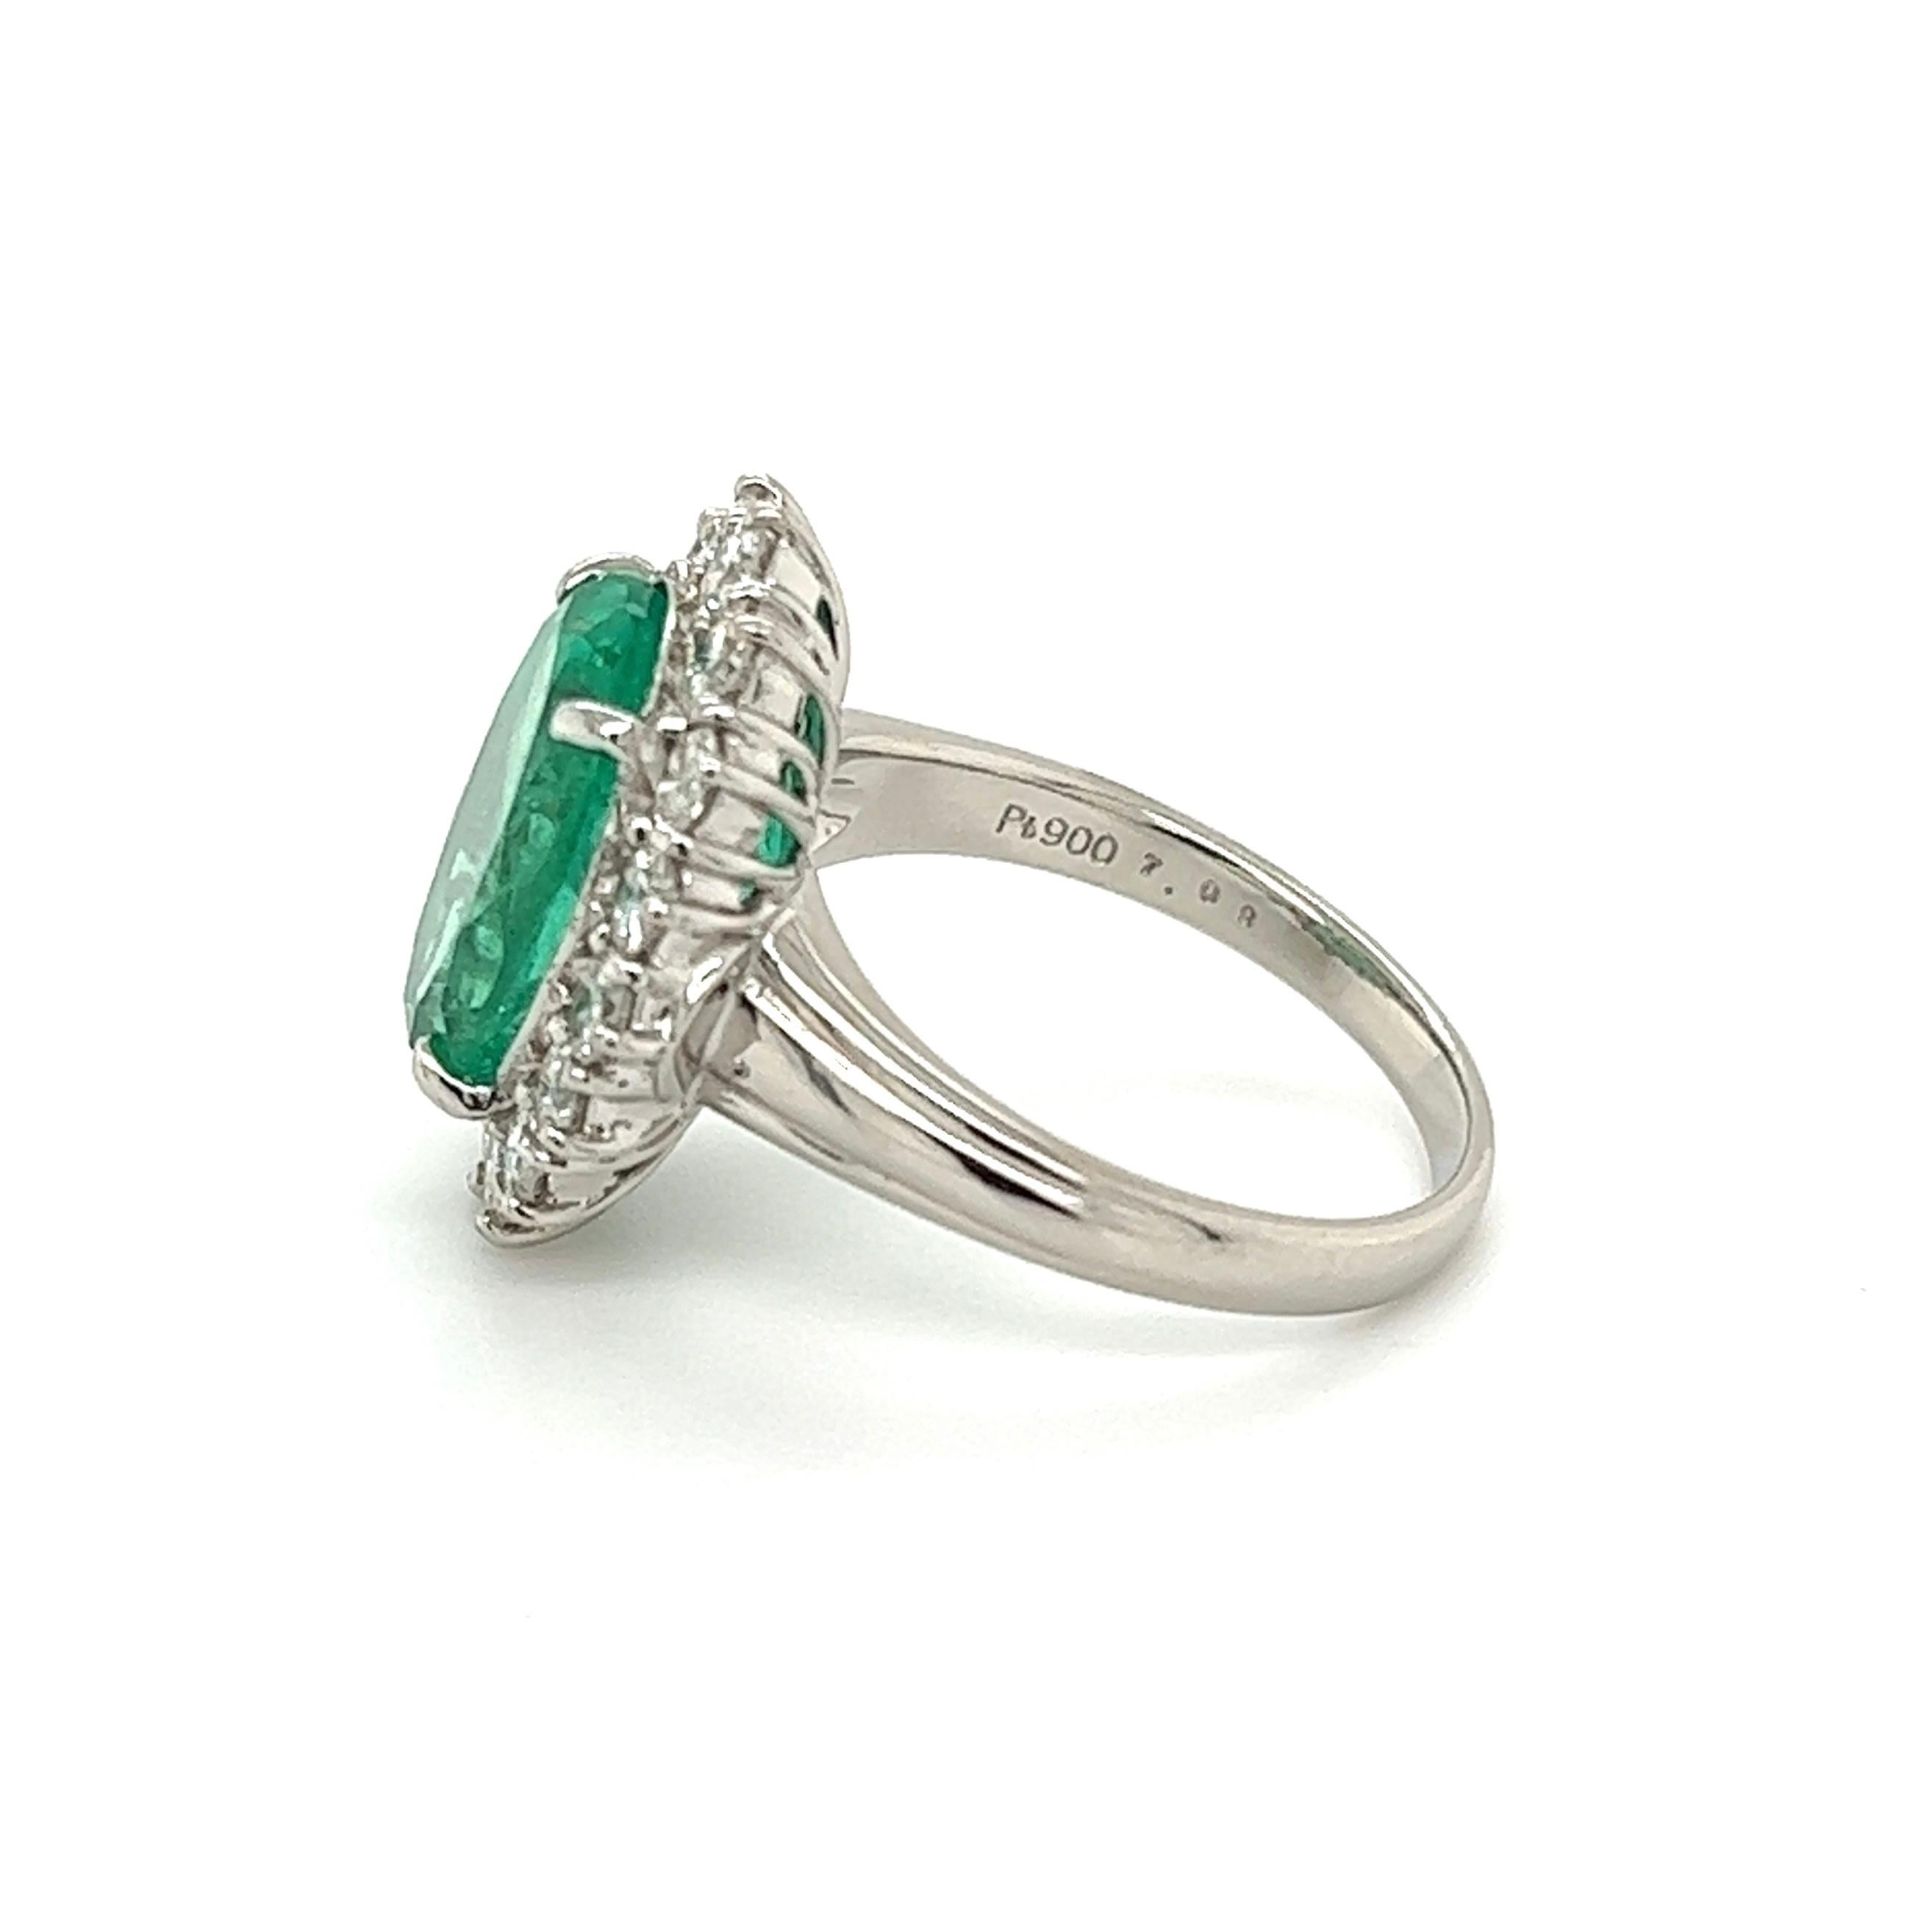 Women's 7.09 Carat Emerald GIA and Diamond Platinum Cocktail Ring Estate Fine Jewelry For Sale